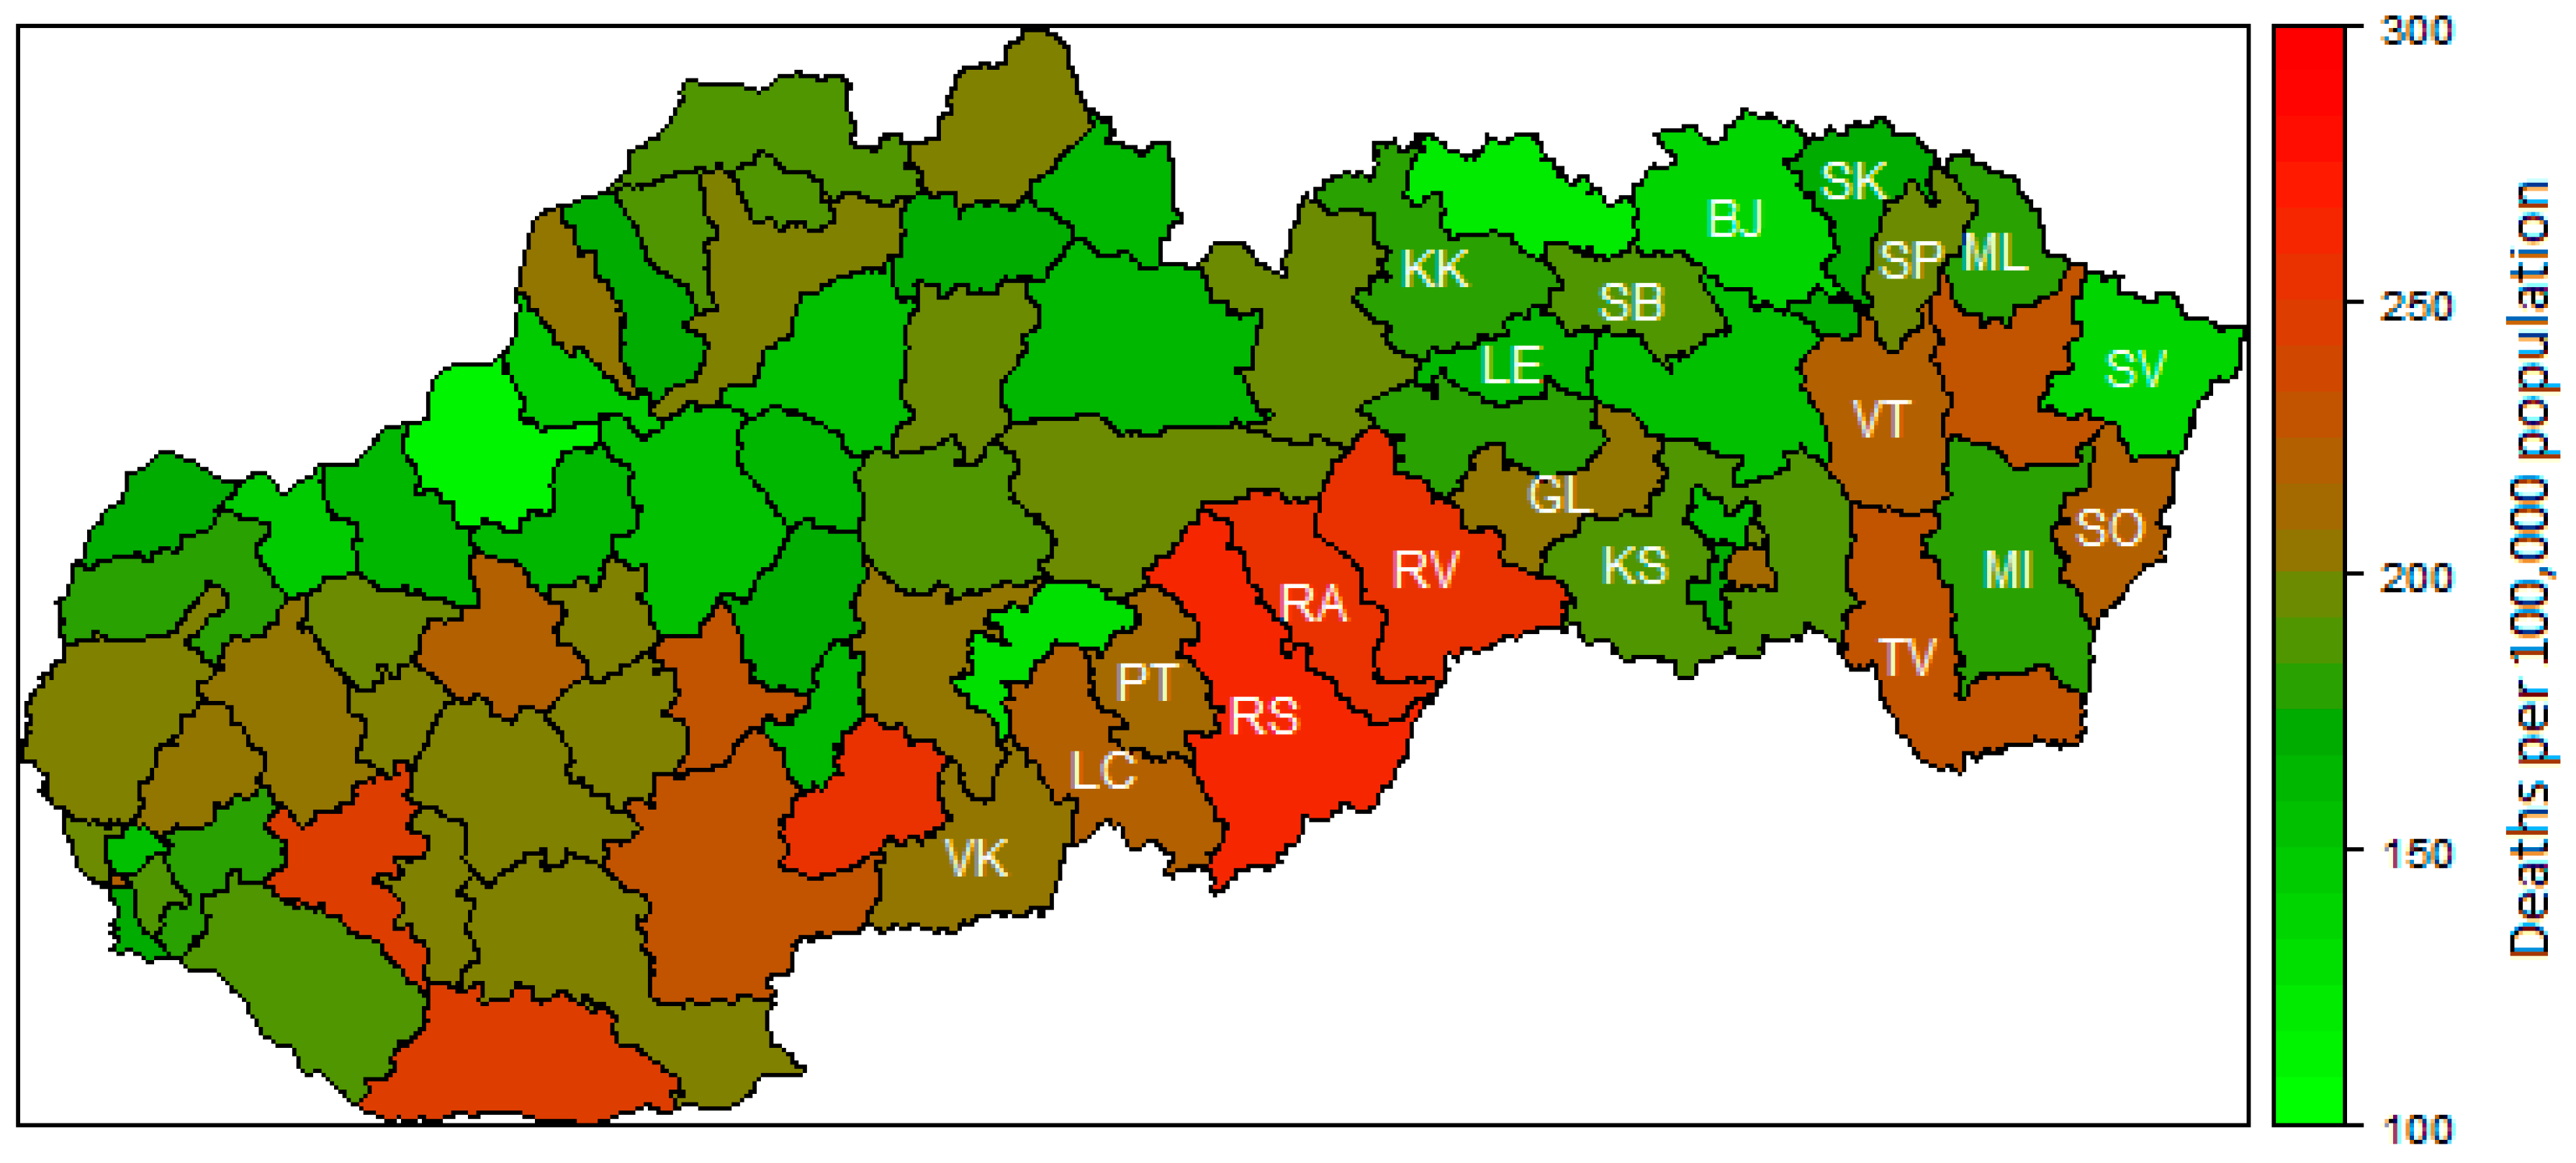 IJERPH | Free Full-Text | Preventable Mortality in Regions of  Slovakia—Quantification of Regional Disparities and Investigation of the  Impact of Environmental Factors | HTML